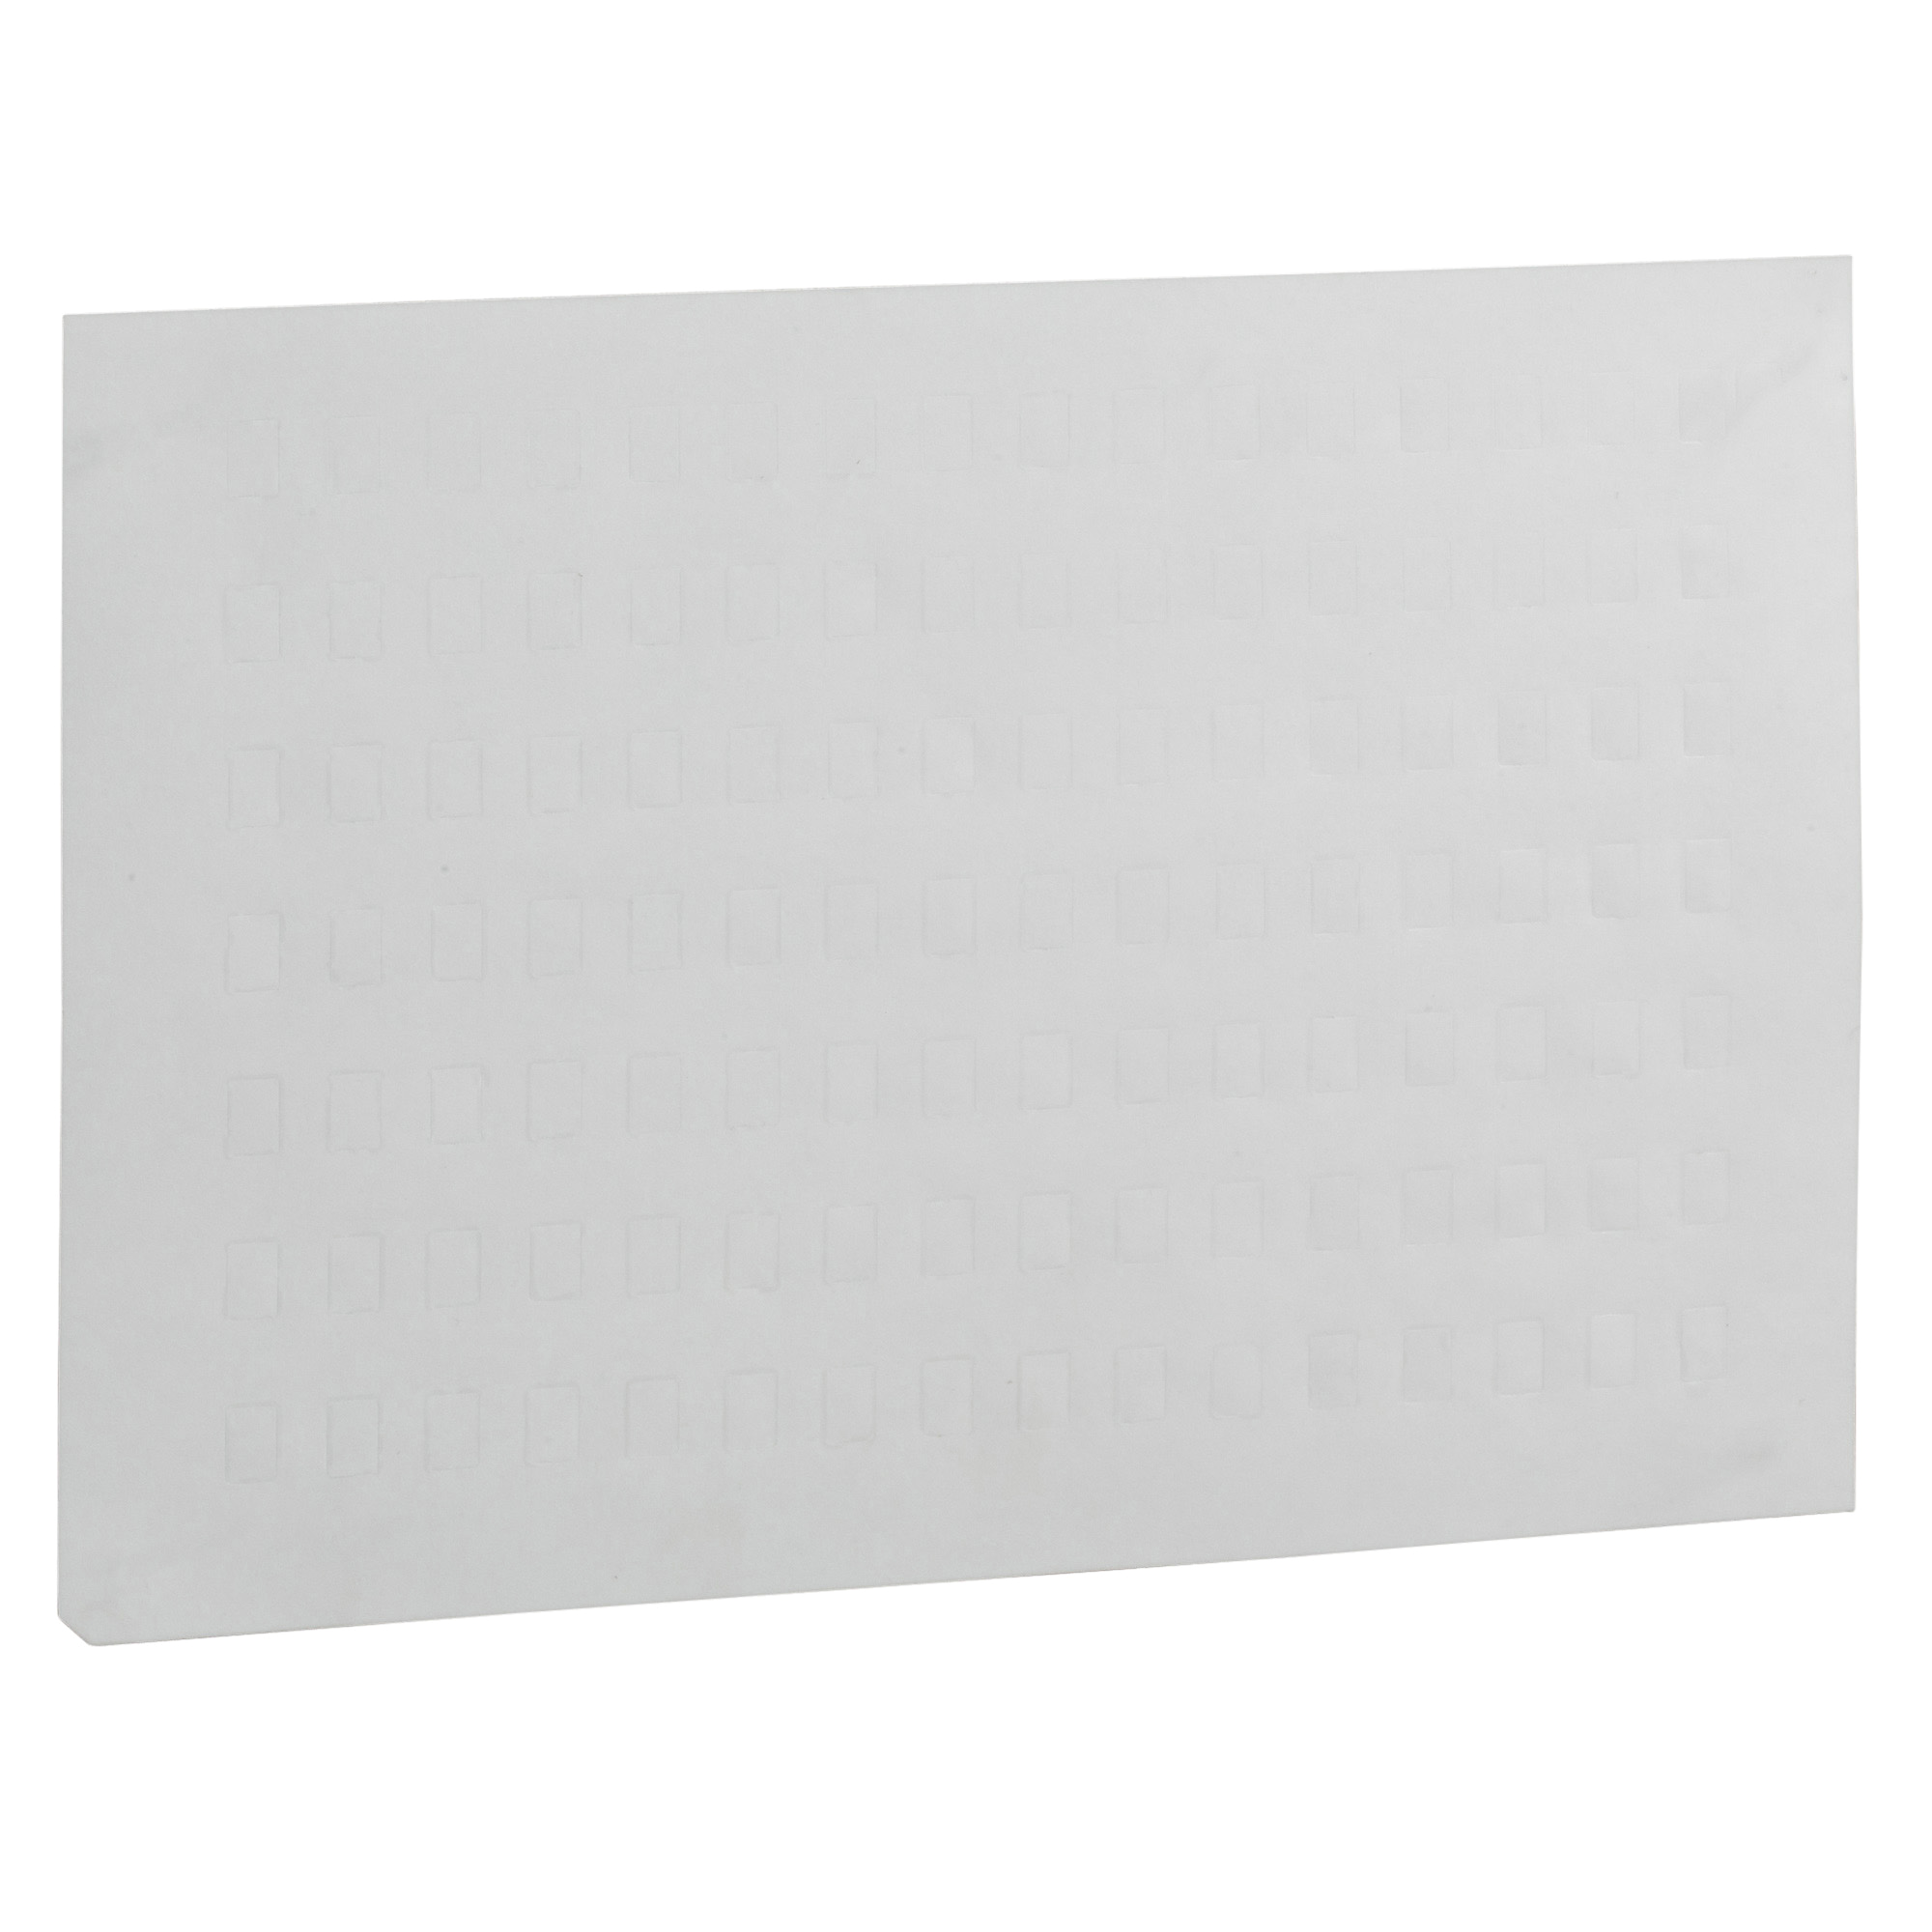 sheet of labels - blank - 8 x 33 mm - for TeSys Deca